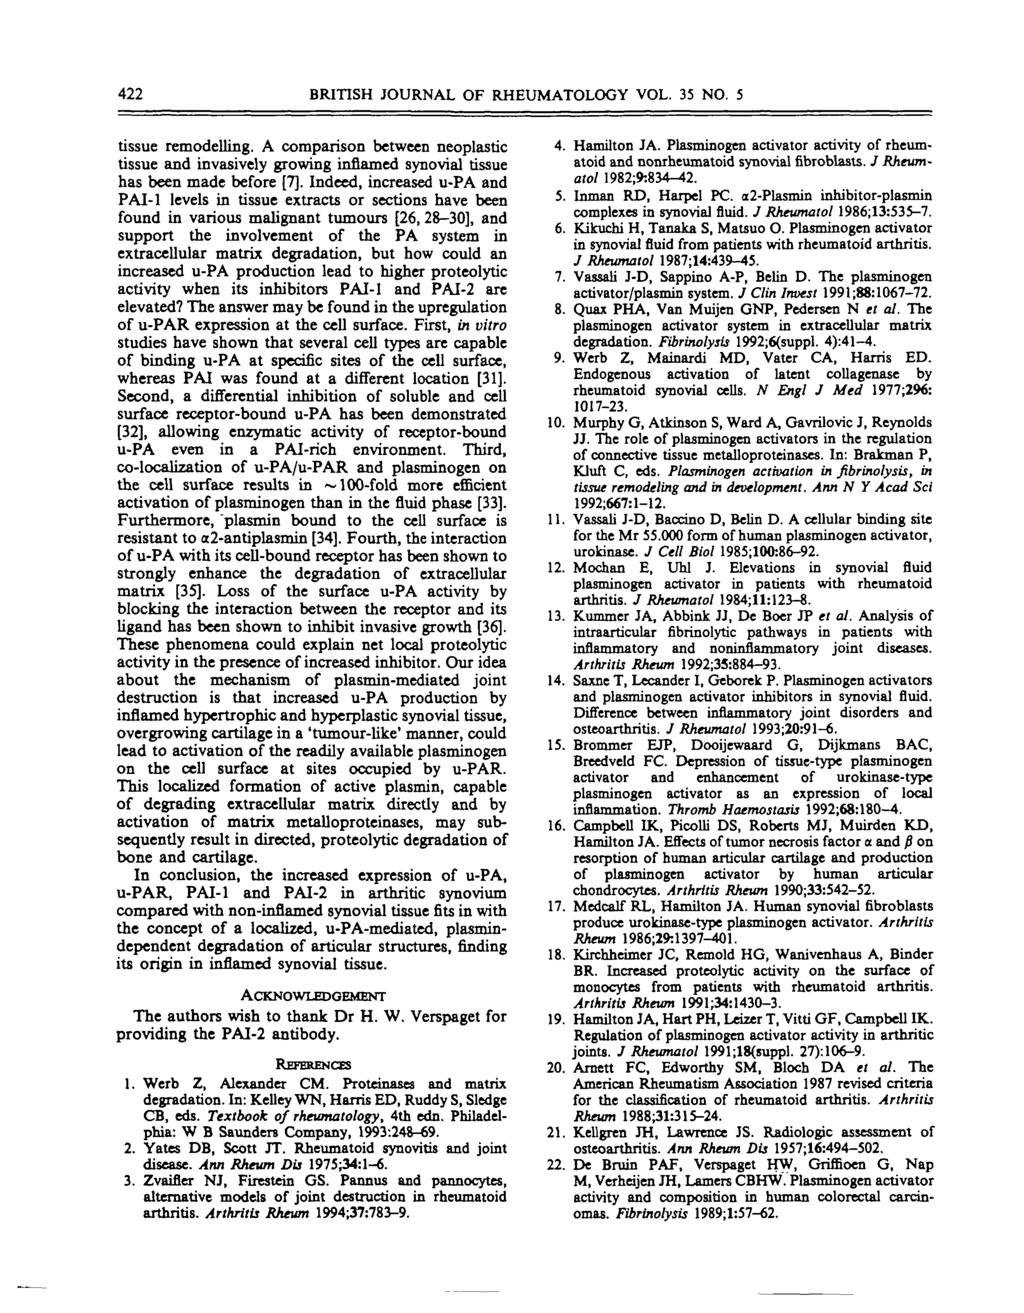 422 BRITISH JOURNAL OF RHEUMATOLOGY VOL. 35 NO. 5 tissue remodelling. A omparison between neoplasti tissue and invasively growing inflamed synovial tissue has been made before [7].